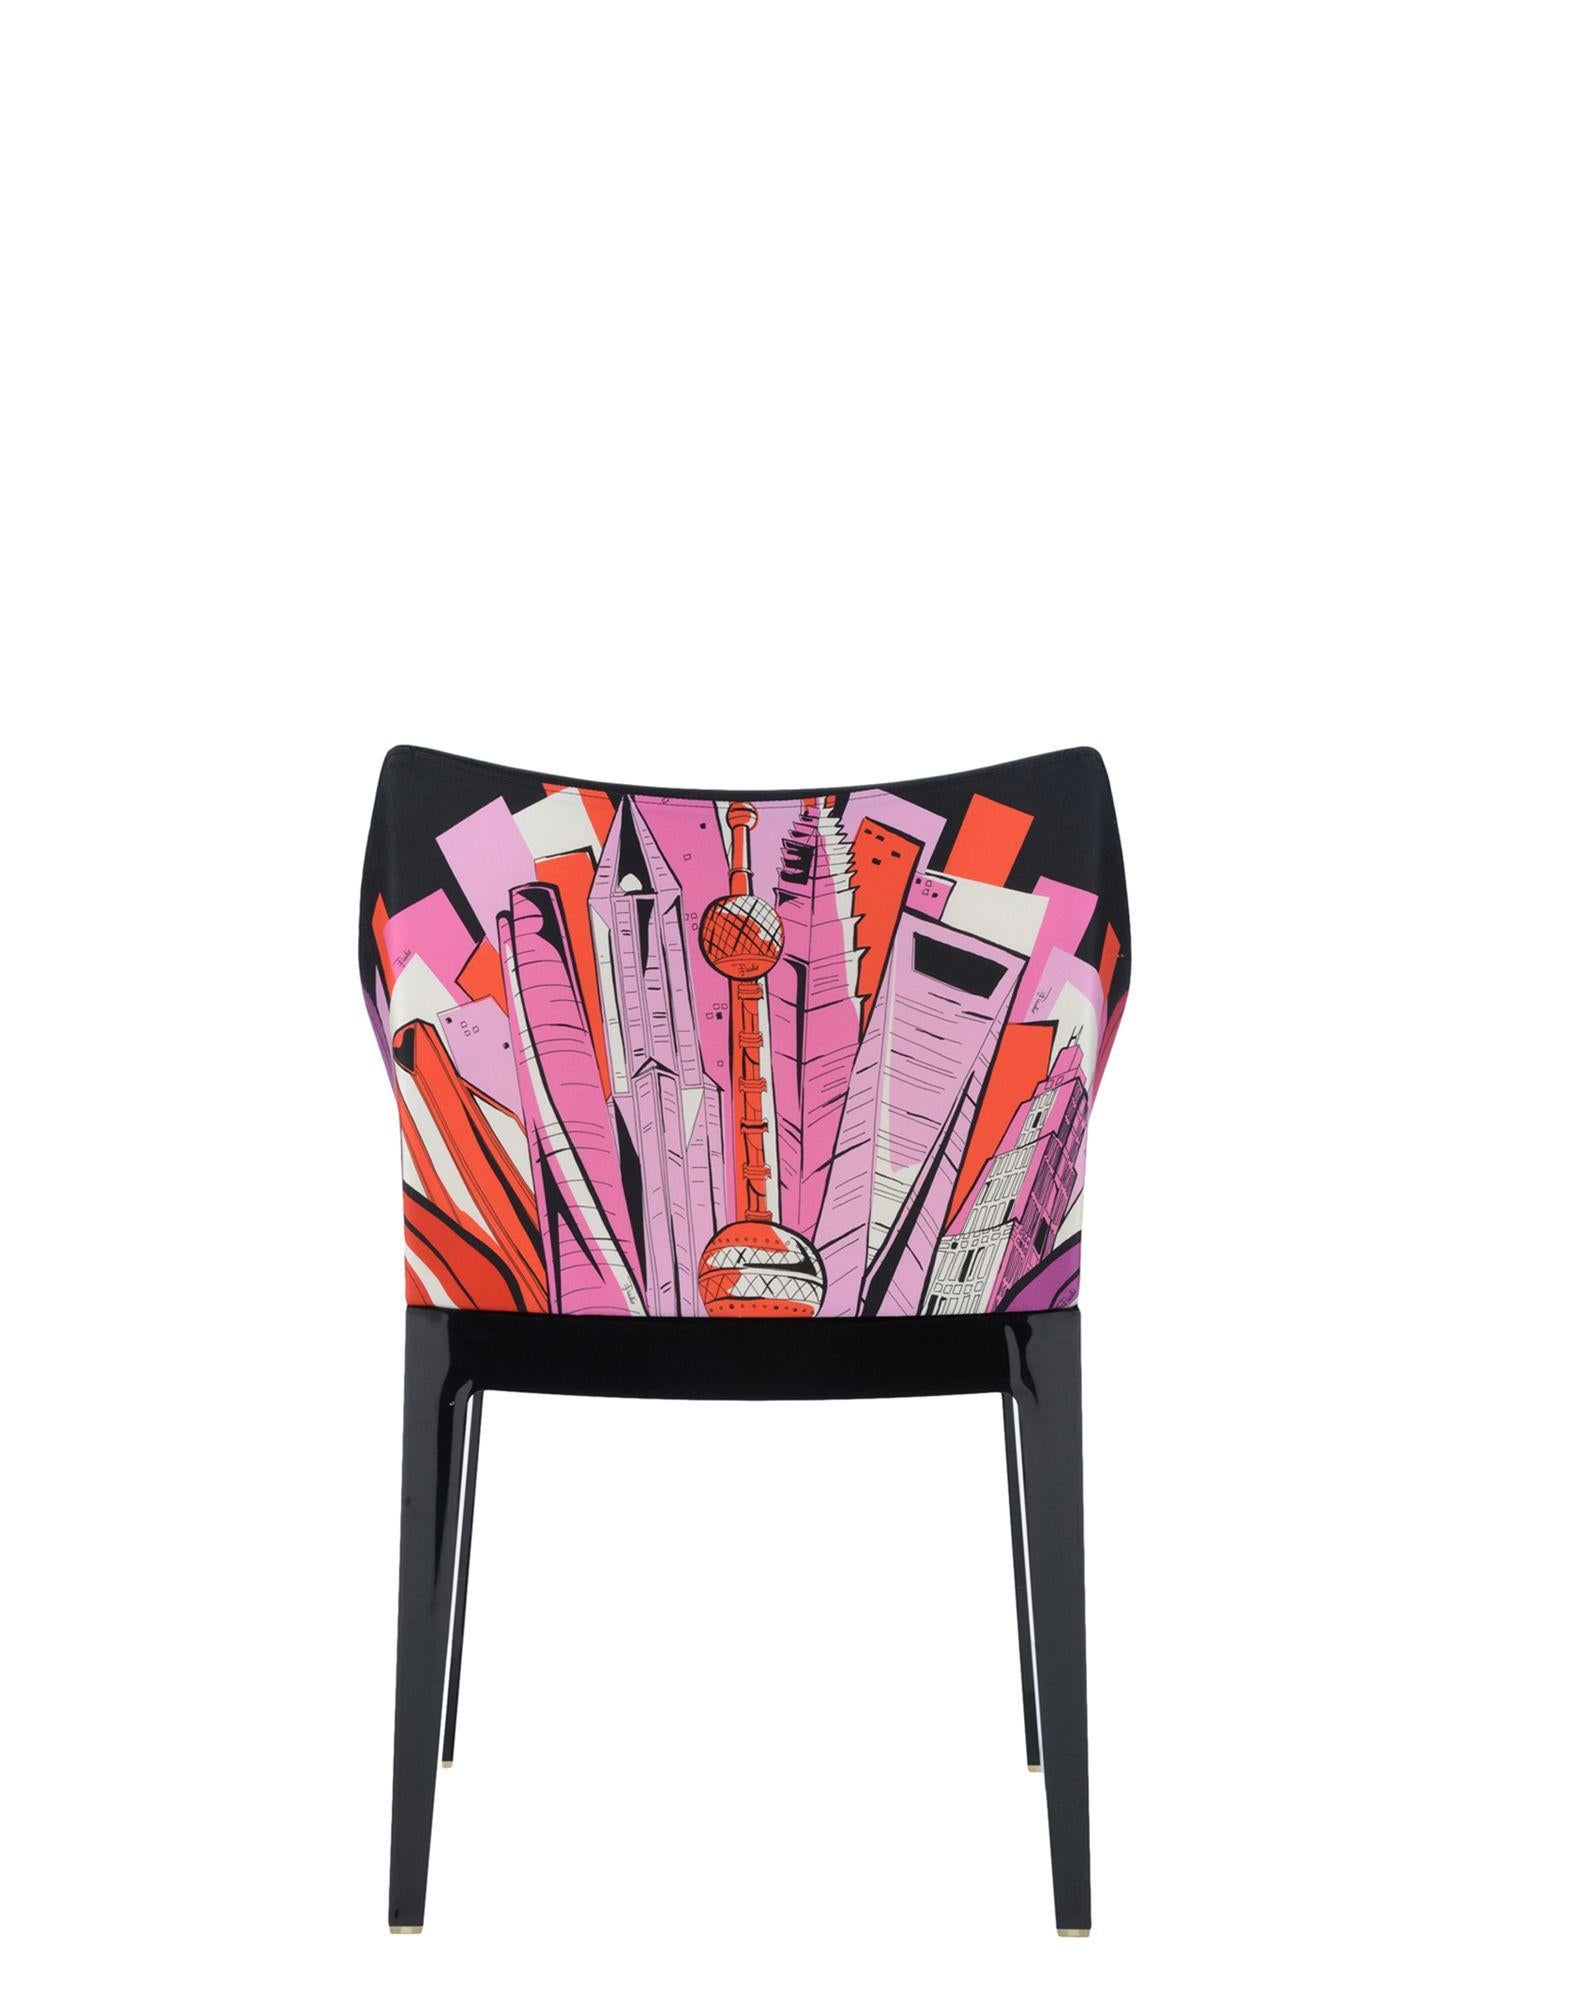 Kartell Madame Chair in Shanghai Print by Philippe Starck 